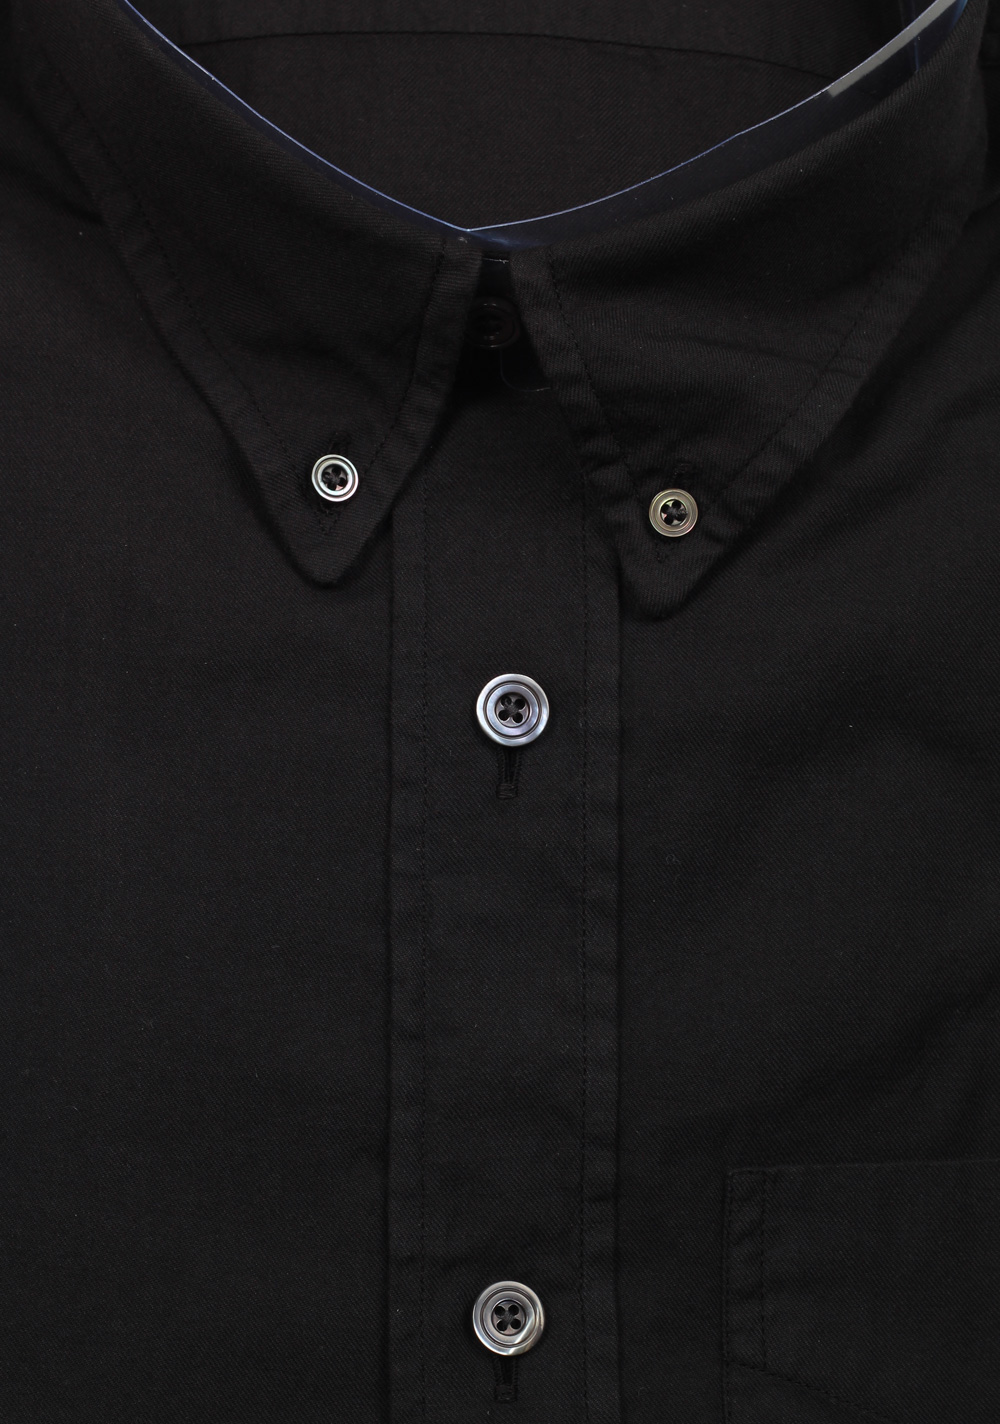 TOM FORD Solid Black Casual Button Down Shirt Size 43 / 17 U.S. | Costume Limité